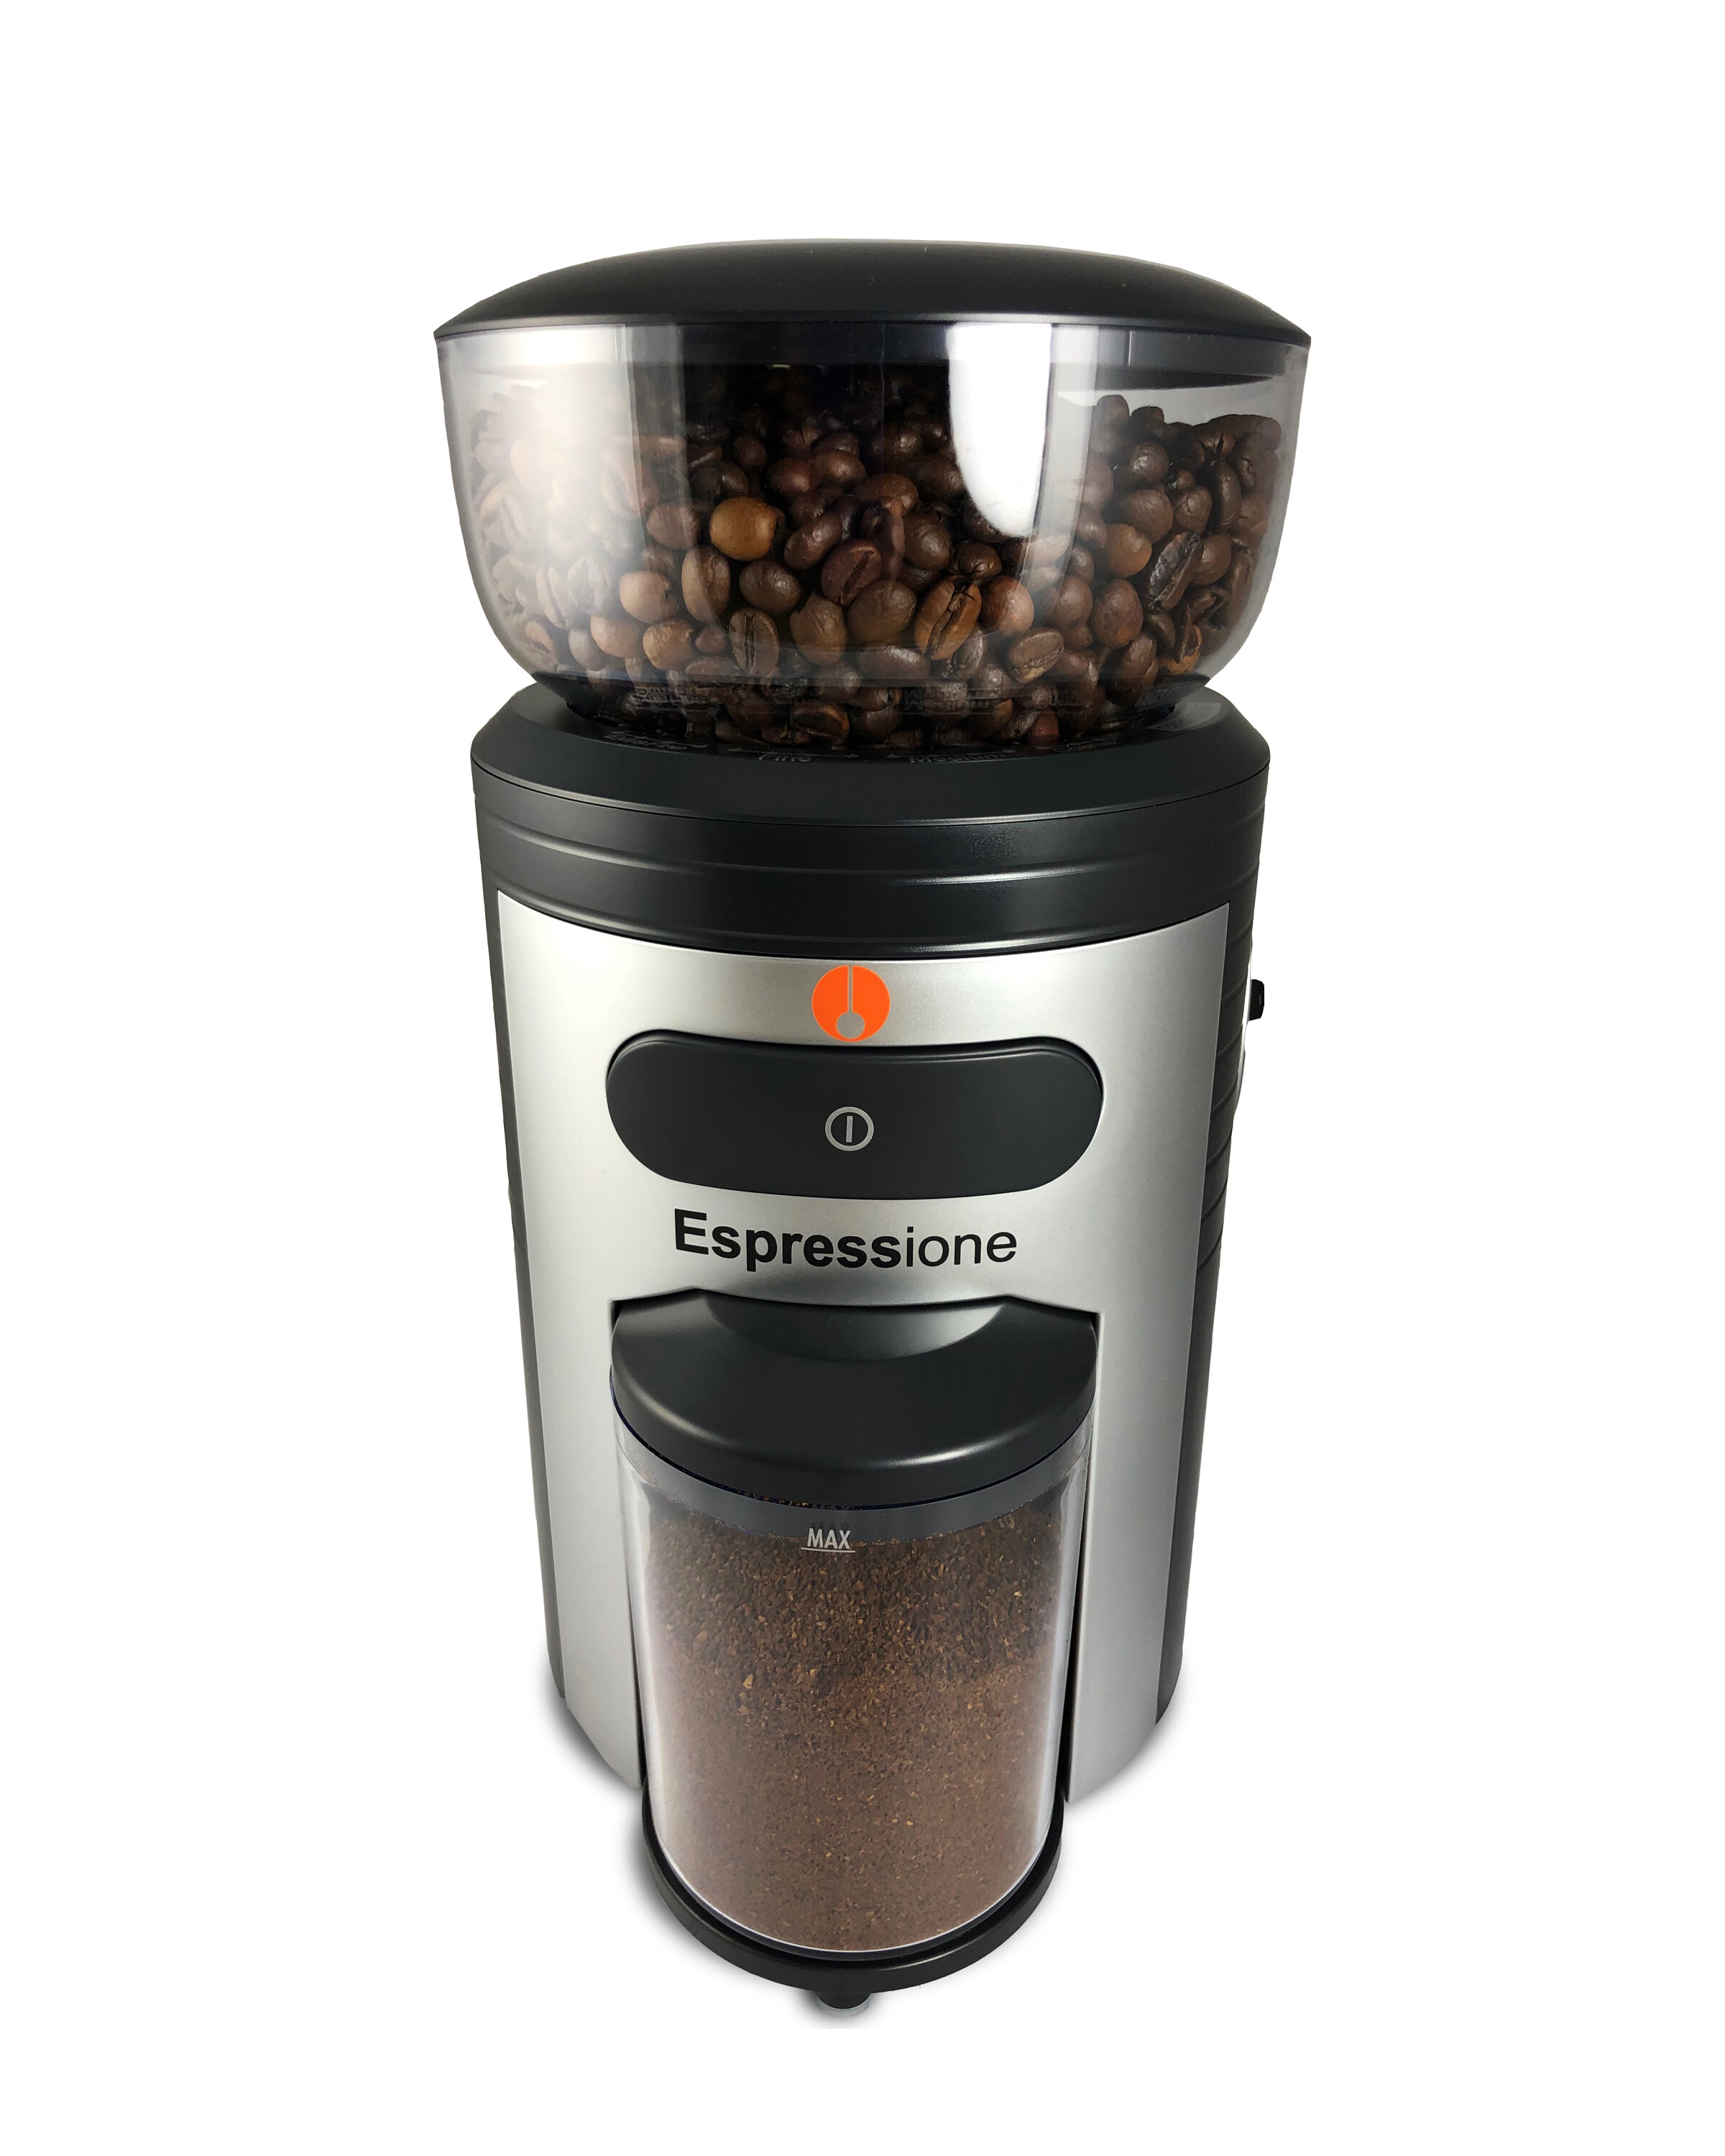 Mr. Coffee Cafe Grind 18 Cup Automatic Burr Grinder Stainless Steel